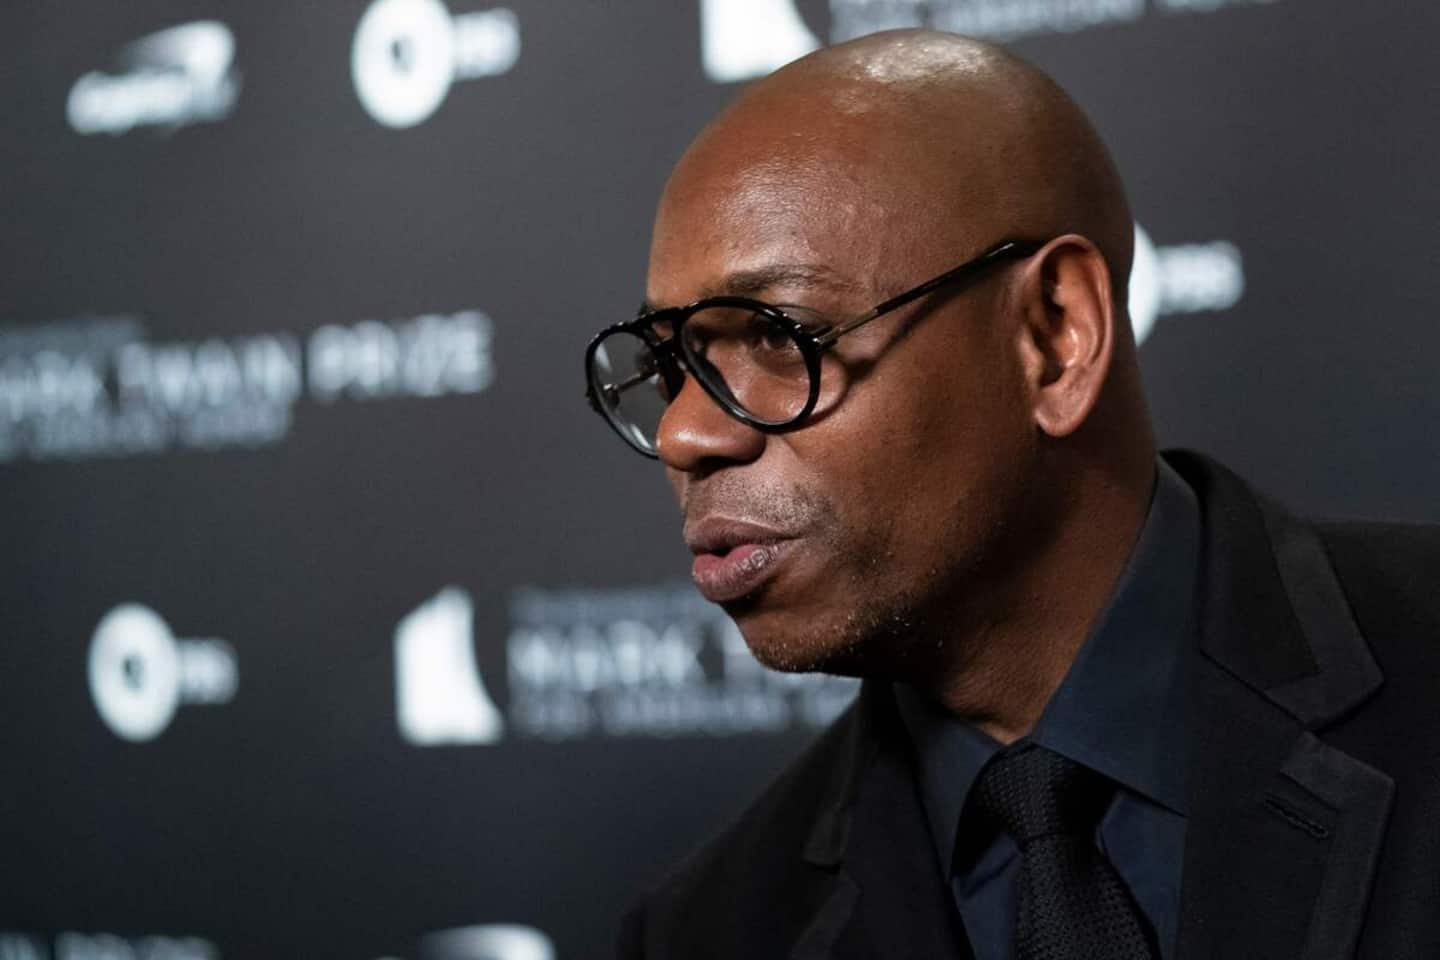 Disparaging remarks: controversy over the cancellation of a show by comedian Dave Chappelle